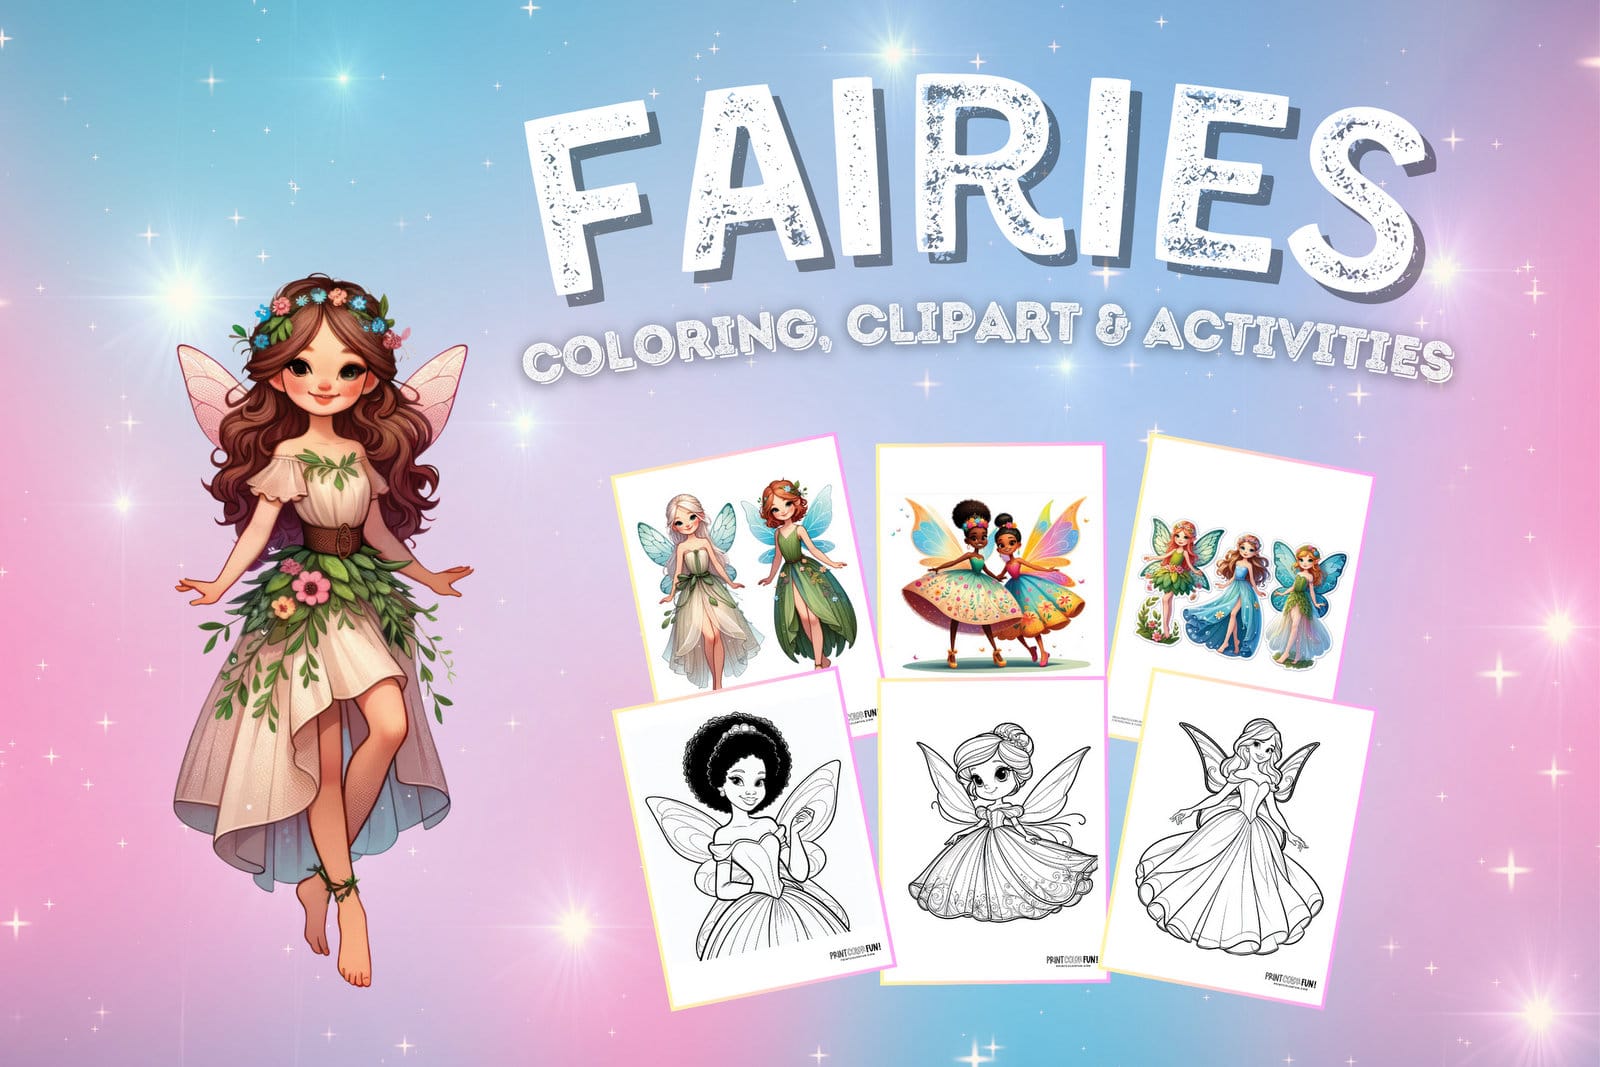 Fairy and fairies coloring page clipart activities from PrintColorFun com